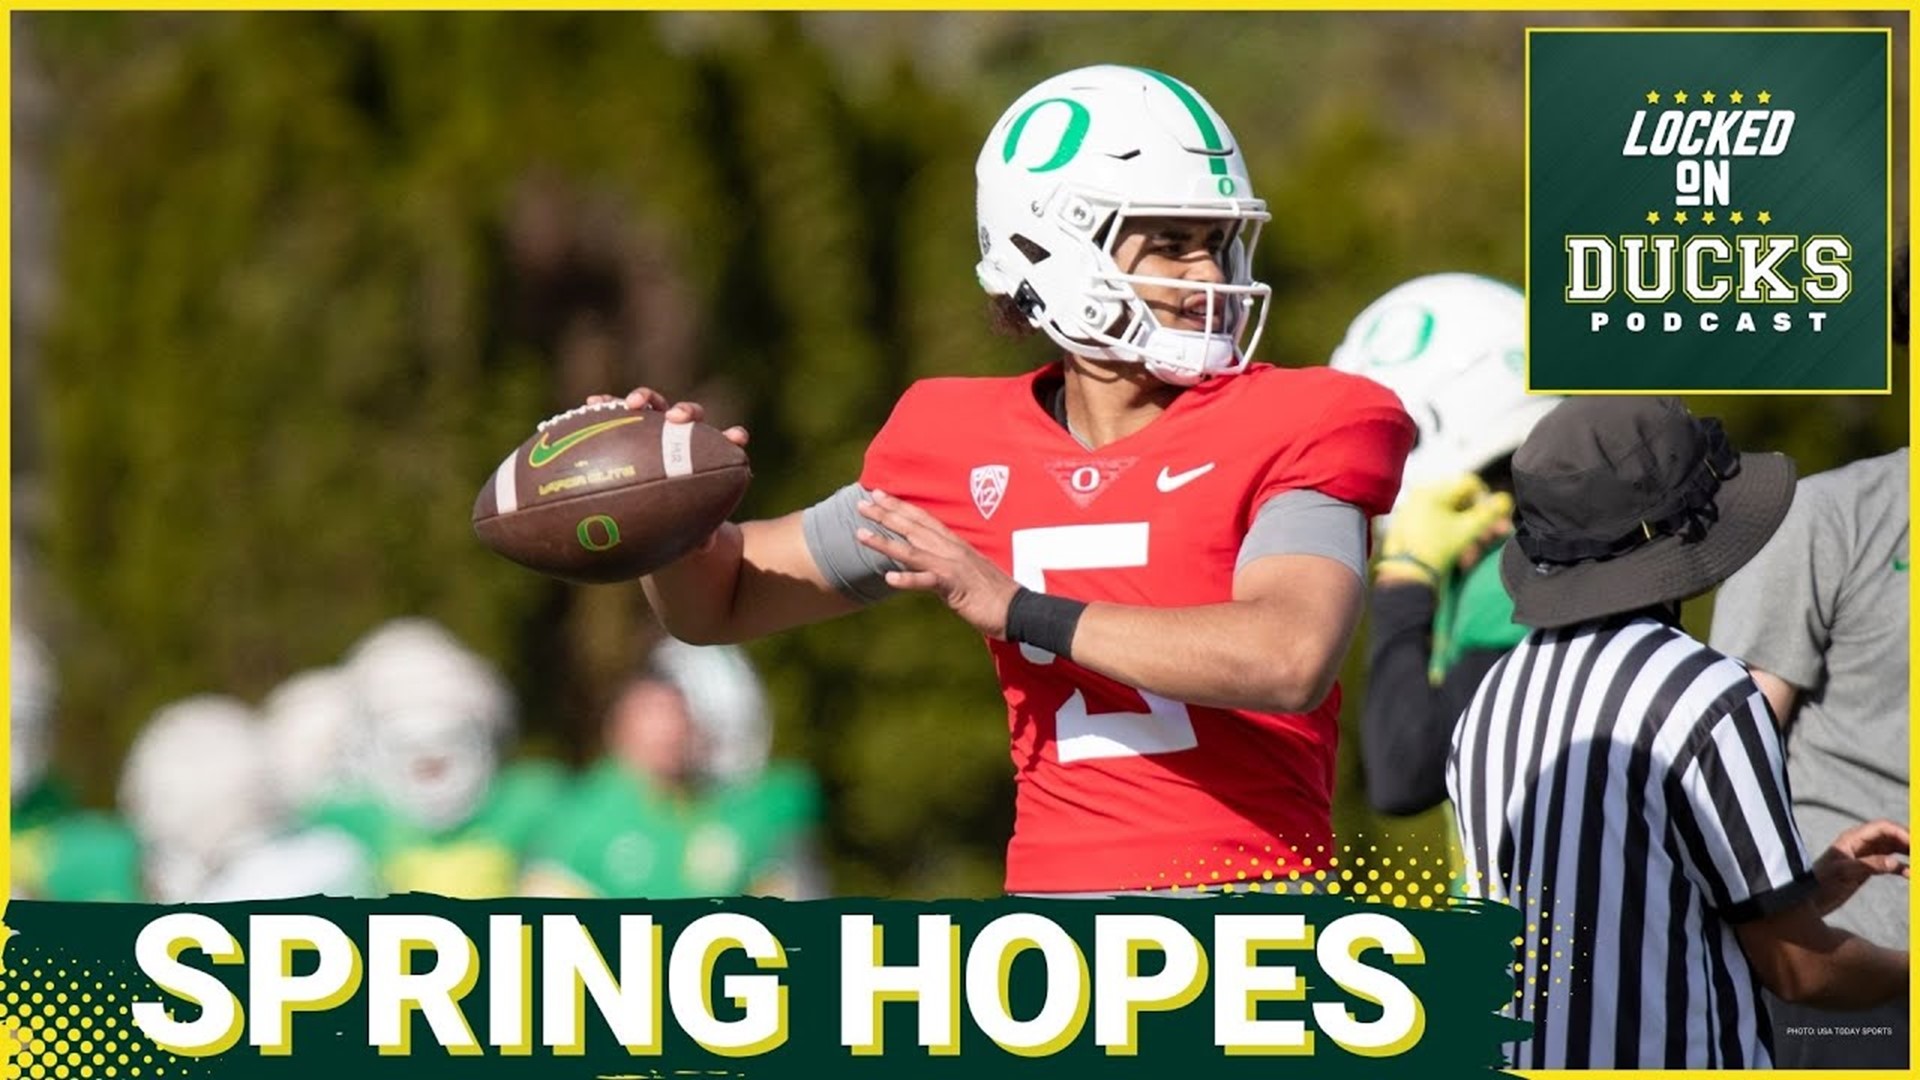 Oregon Football's Spring Game is this Saturday, April 27th--the public's first look at Dan Lanning's year 3 Ducks team.